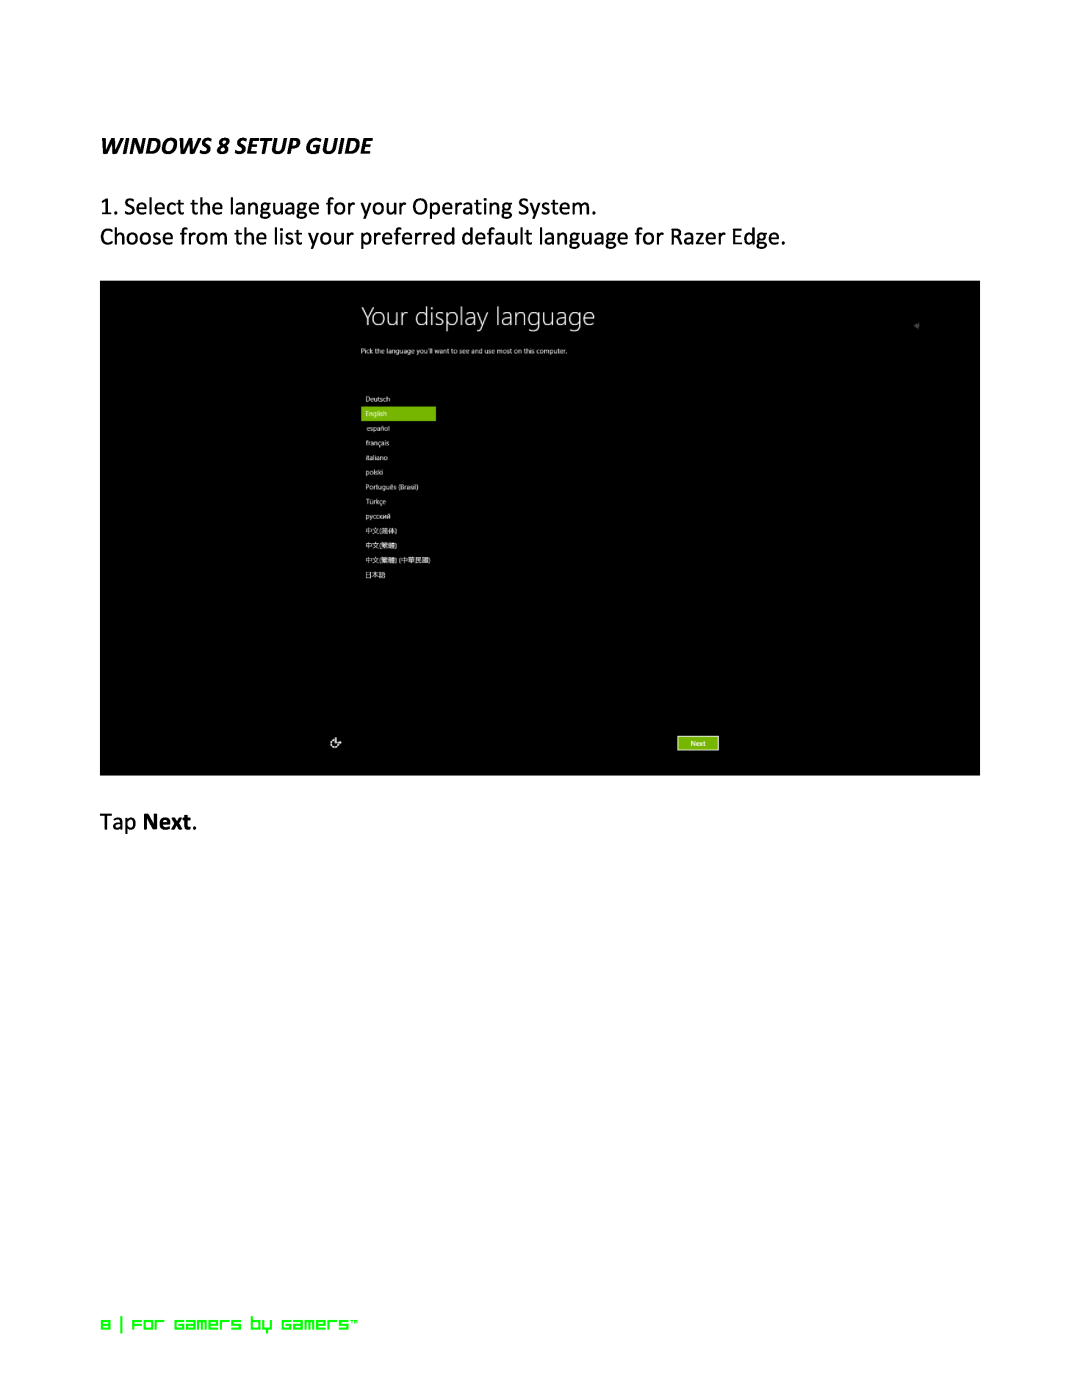 Razer Razer Edge Pro WINDOWS 8 SETUP GUIDE, Select the language for your Operating System, Tap Next, For gamers by gamers 